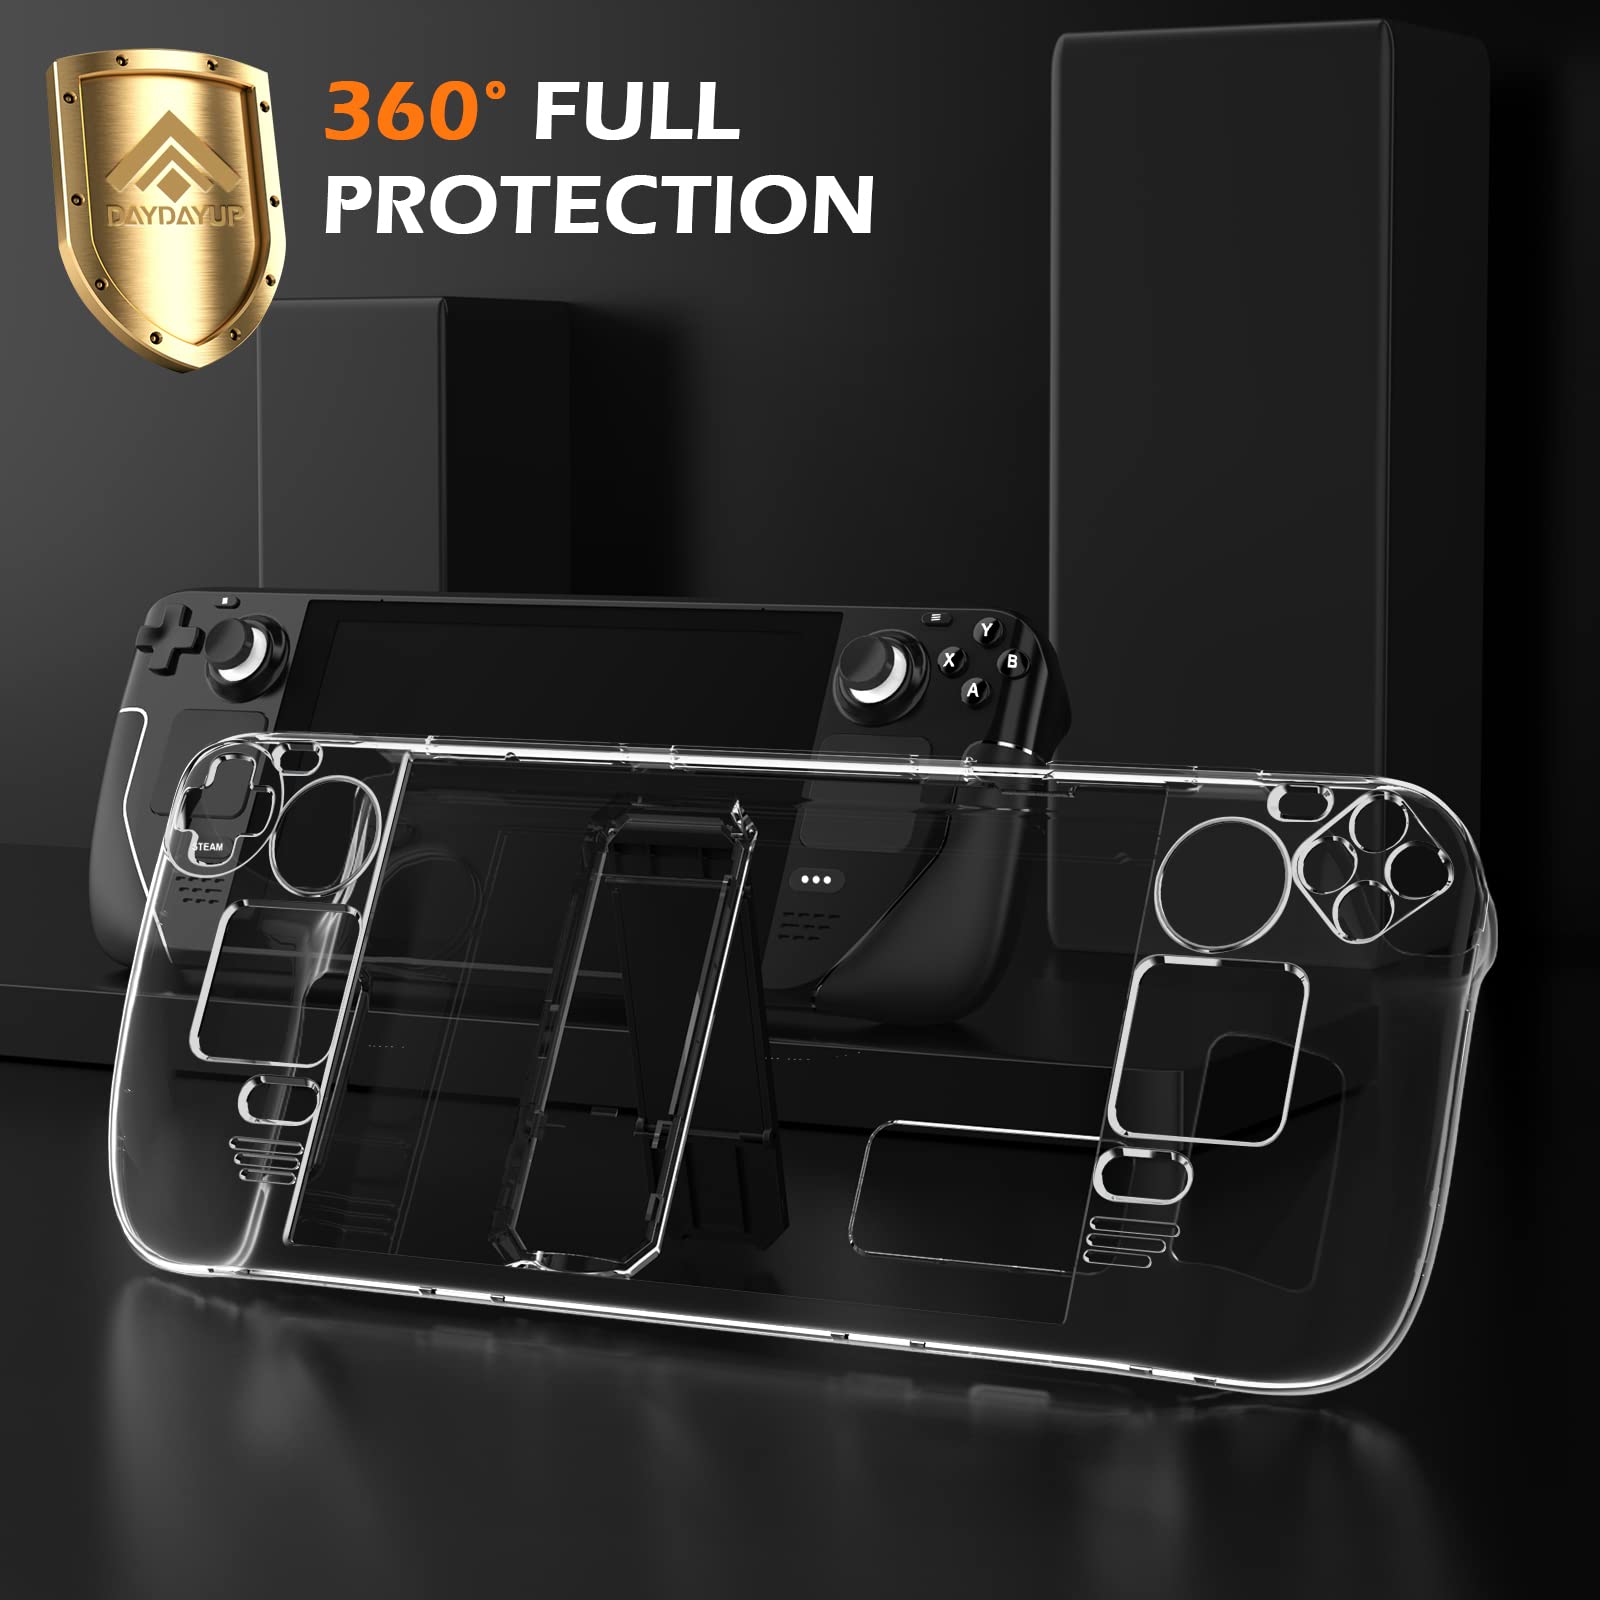 Daydayup Kickstand Protective Case for Steam Deck, Cover Protector with Stand Base, Full Protective Cover Case Compatible with Vavle Steam Deck Accessories, Non-Slip and Anti-Scratch Design, Clear